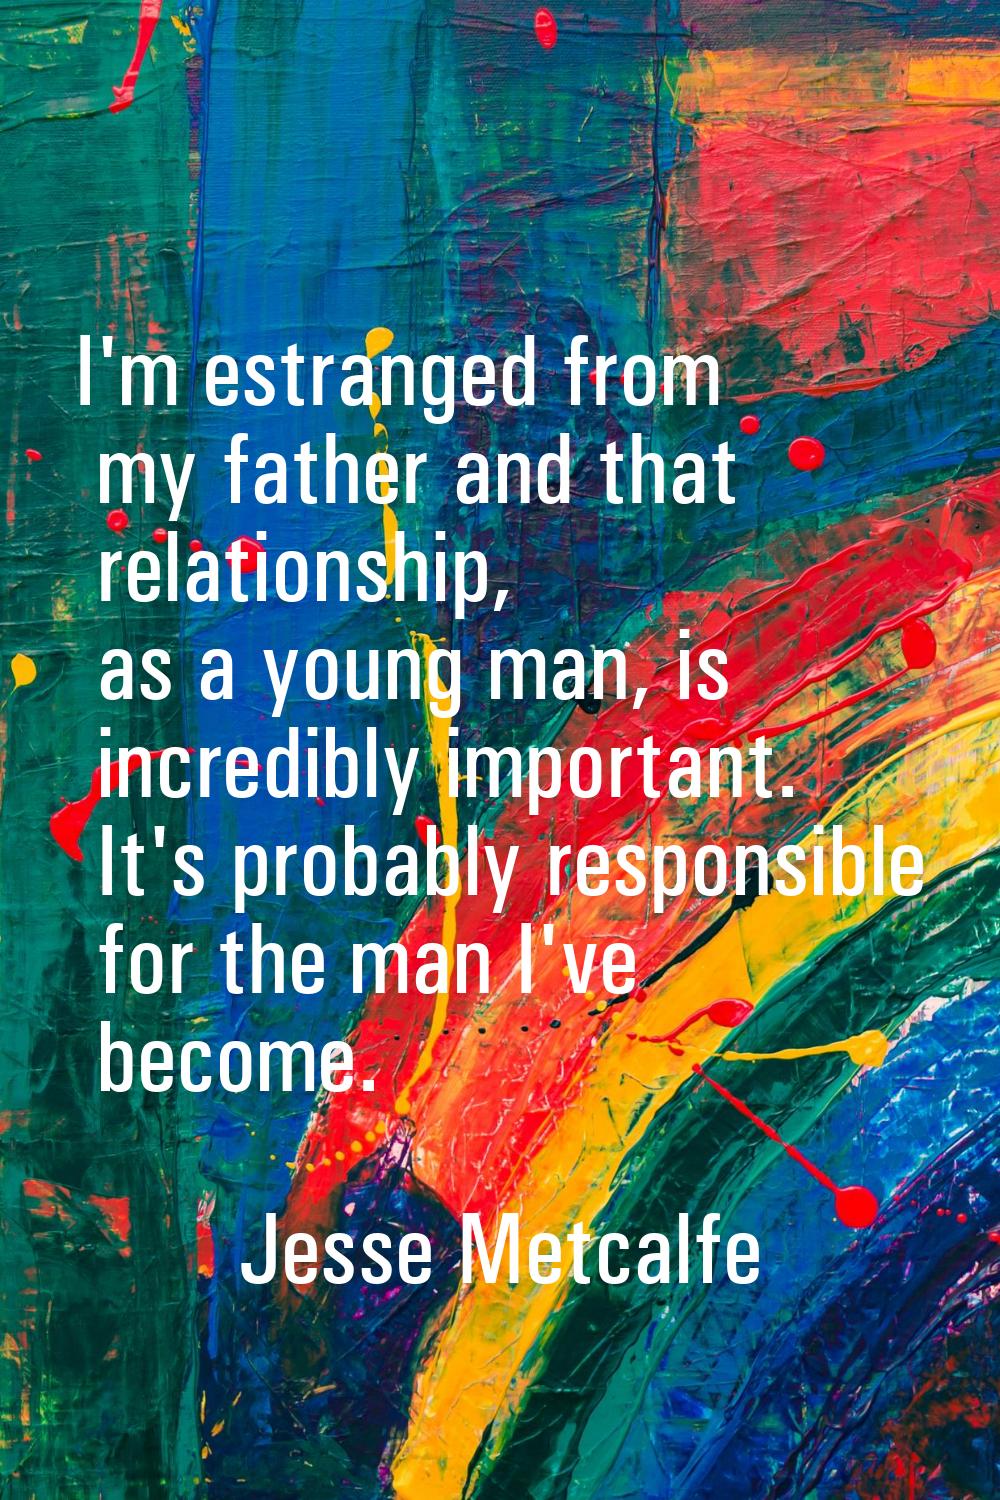 I'm estranged from my father and that relationship, as a young man, is incredibly important. It's p